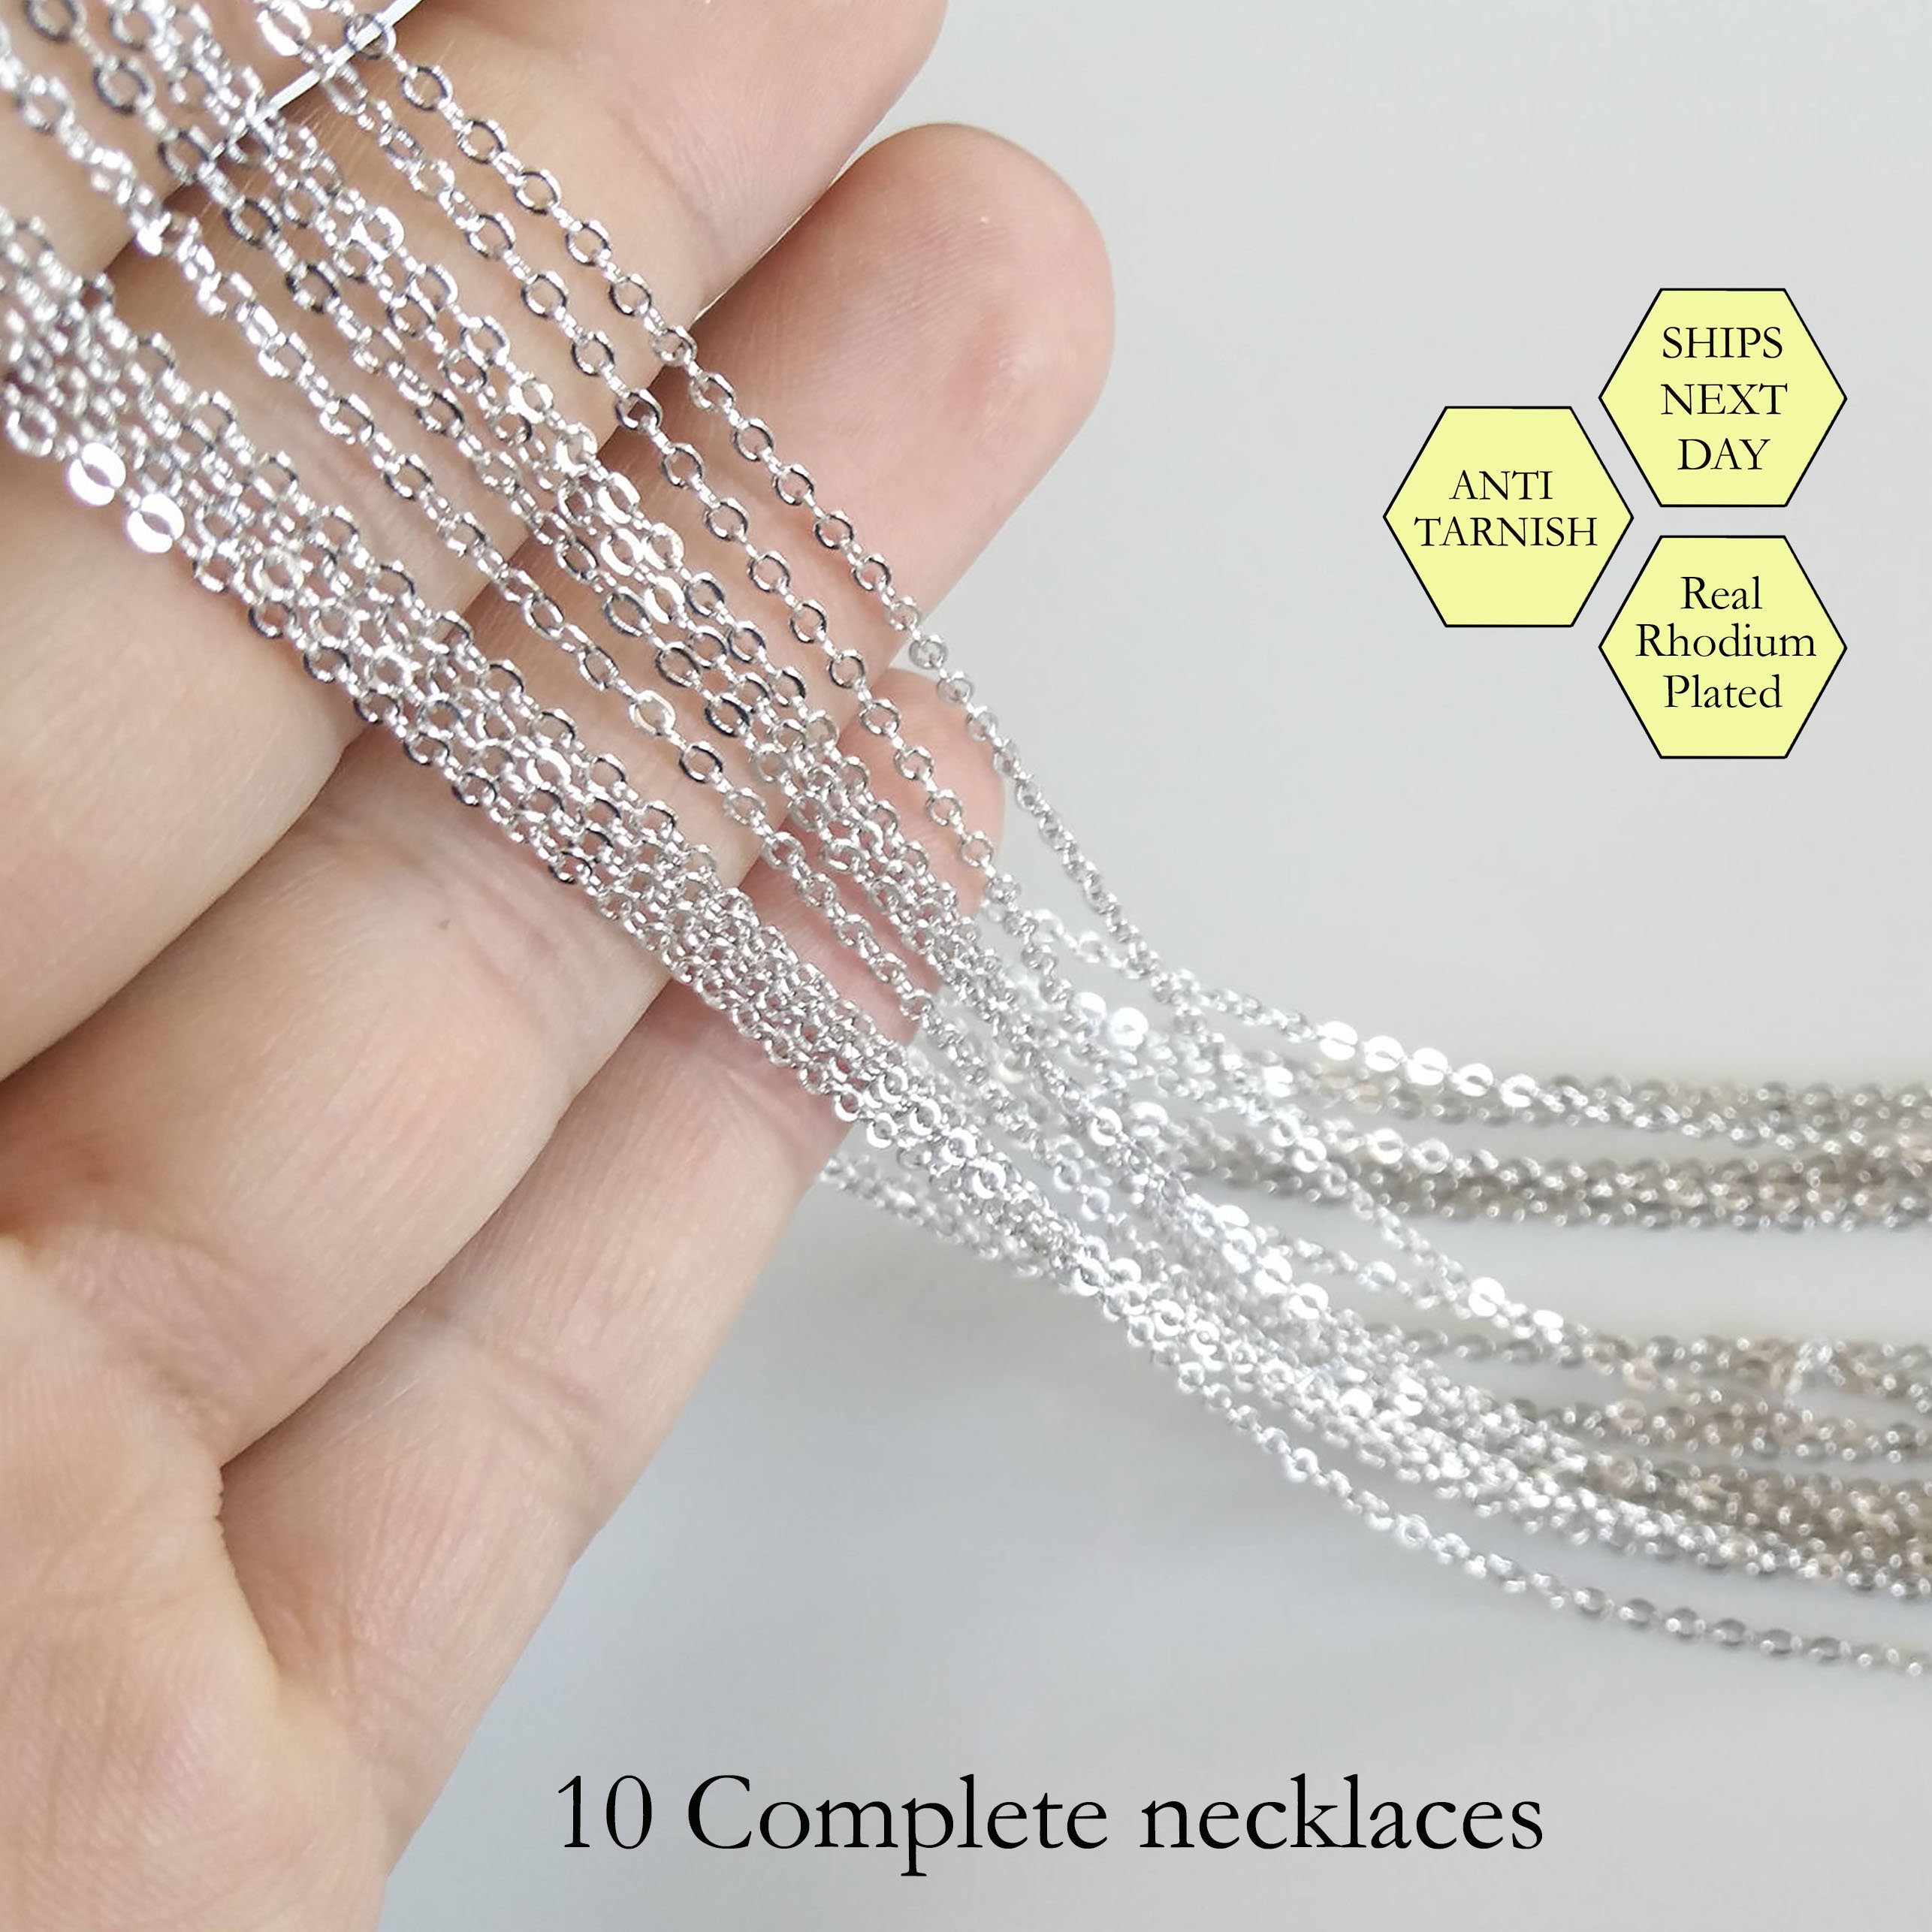 selizo 30 Pack Necklace Chains Bulk for Jewelry Making Bulk Necklace Chains  Silver Plated Cable Chains for Jewelry Making 1.2 mm (18 Inches)